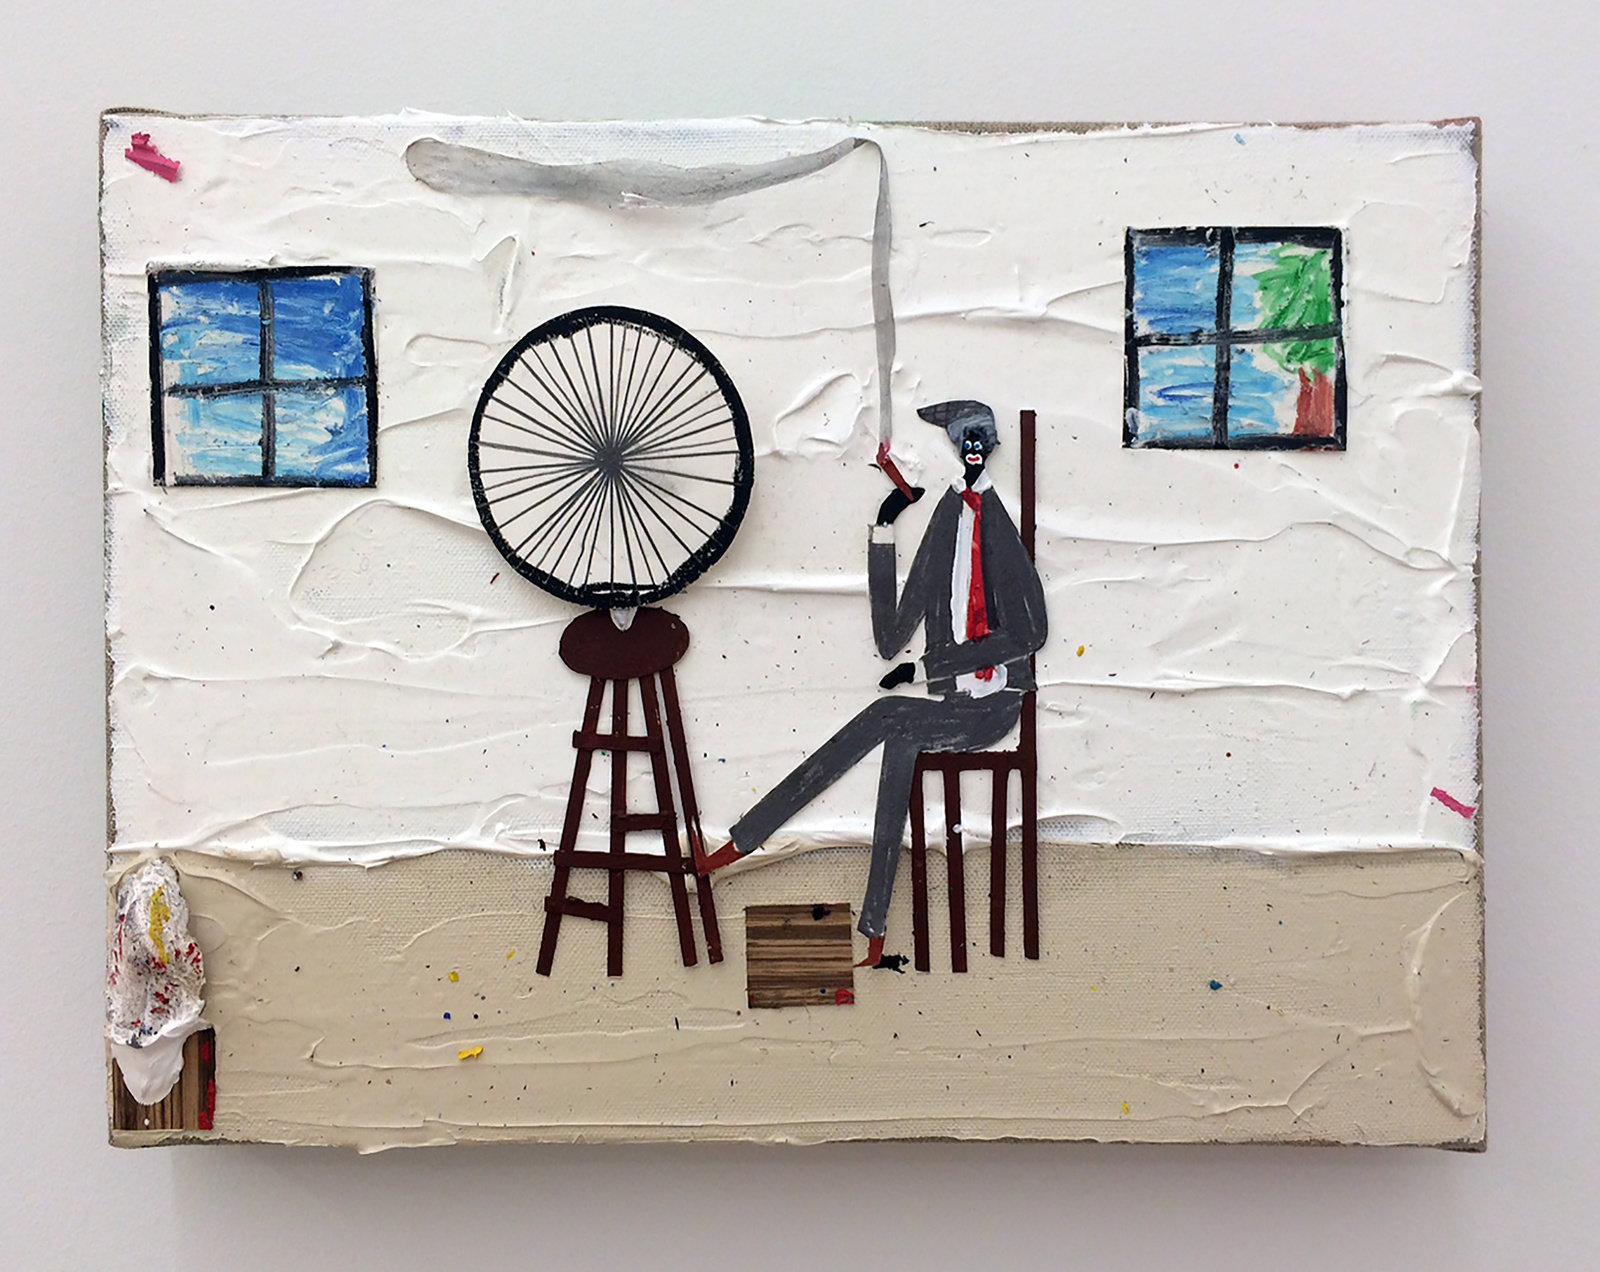 Strother, a black marcel duchamp in nigga with a wheel, 2014, mixed media on linen, 10 x 14 in. 25.4 x 35.56 cm cnon 54.957